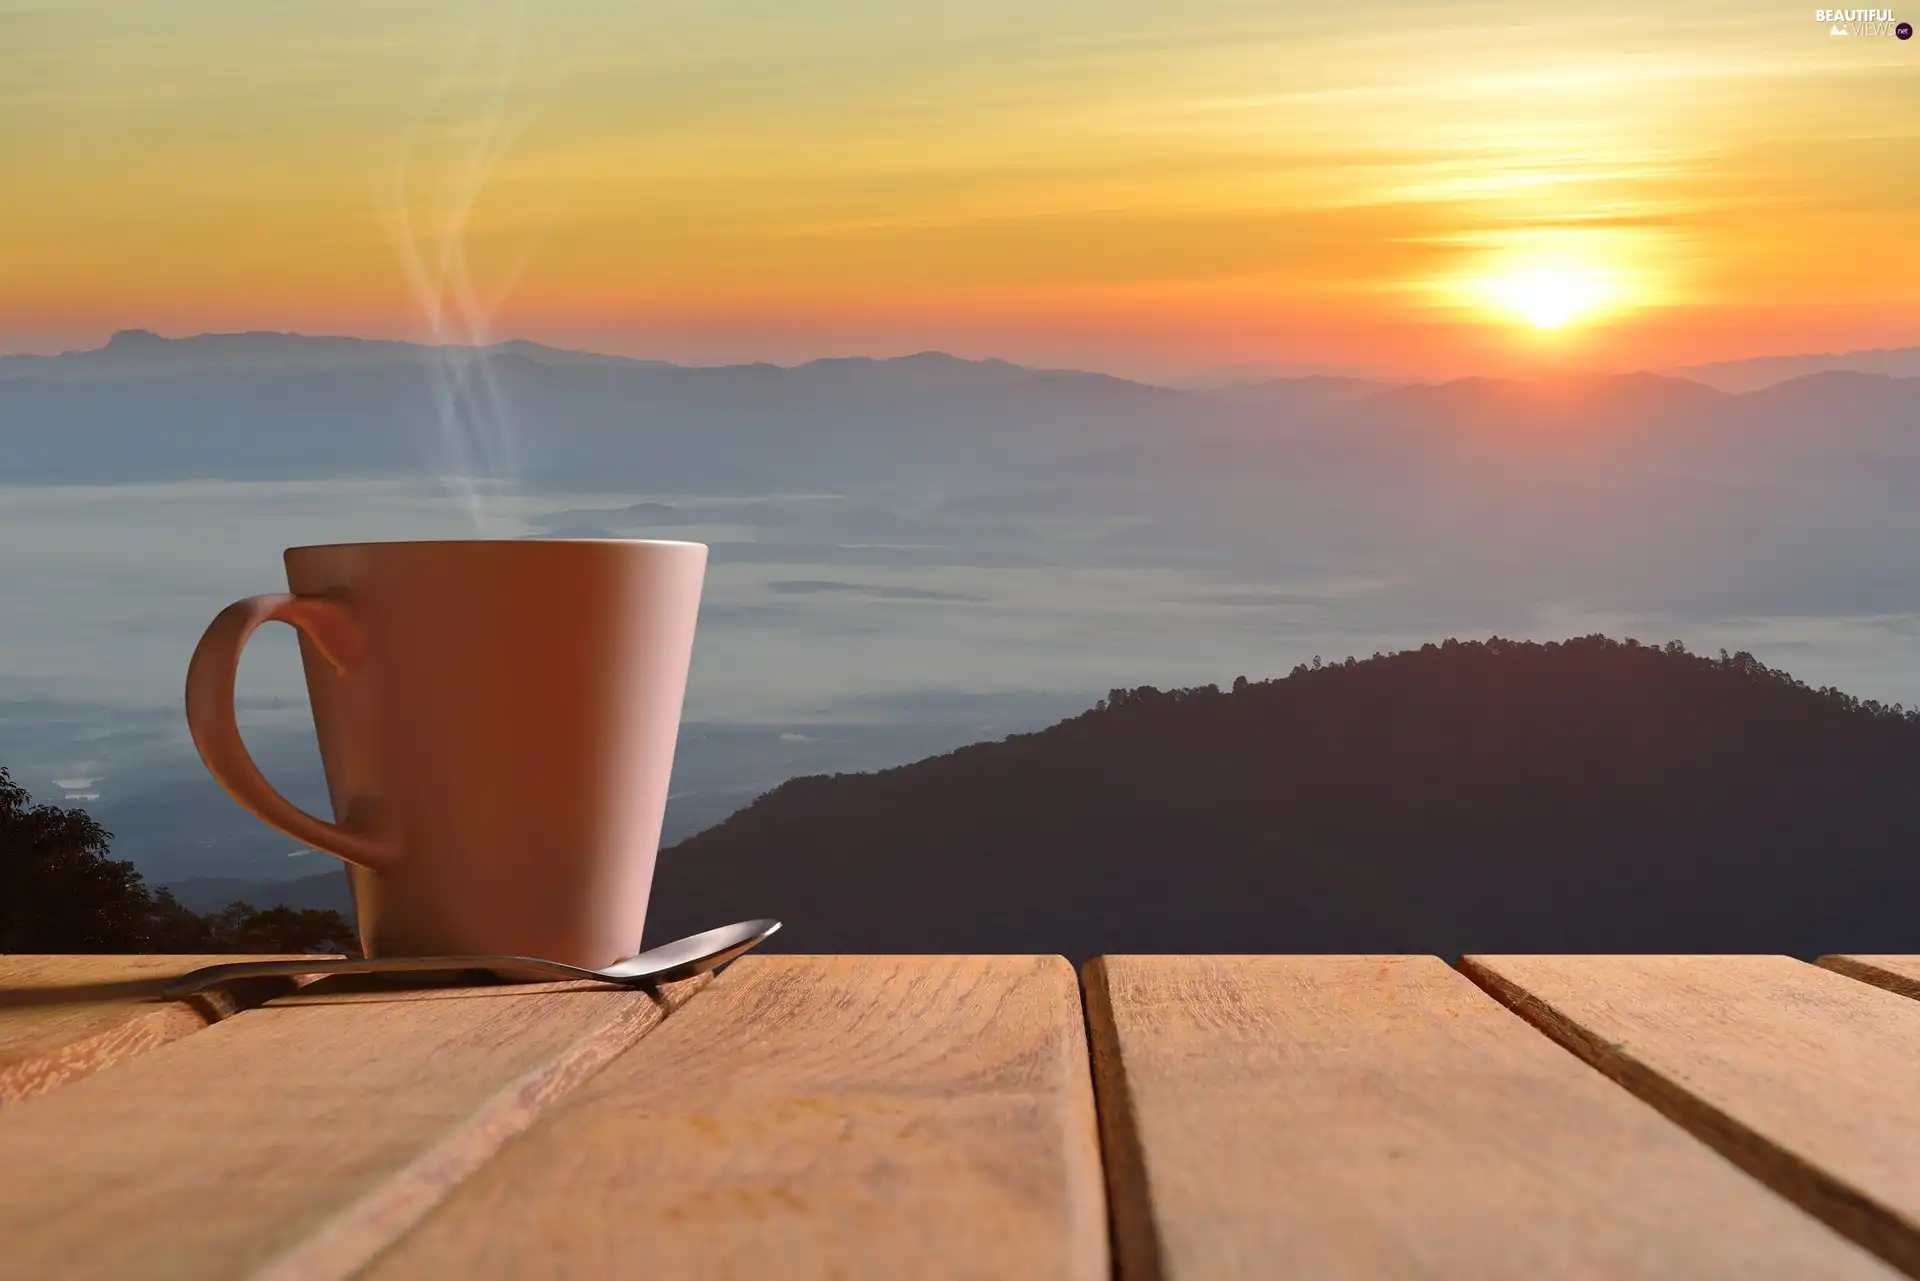 boarding, Steam, Mountains, teaspoon, Cup, landscape, Great Sunsets